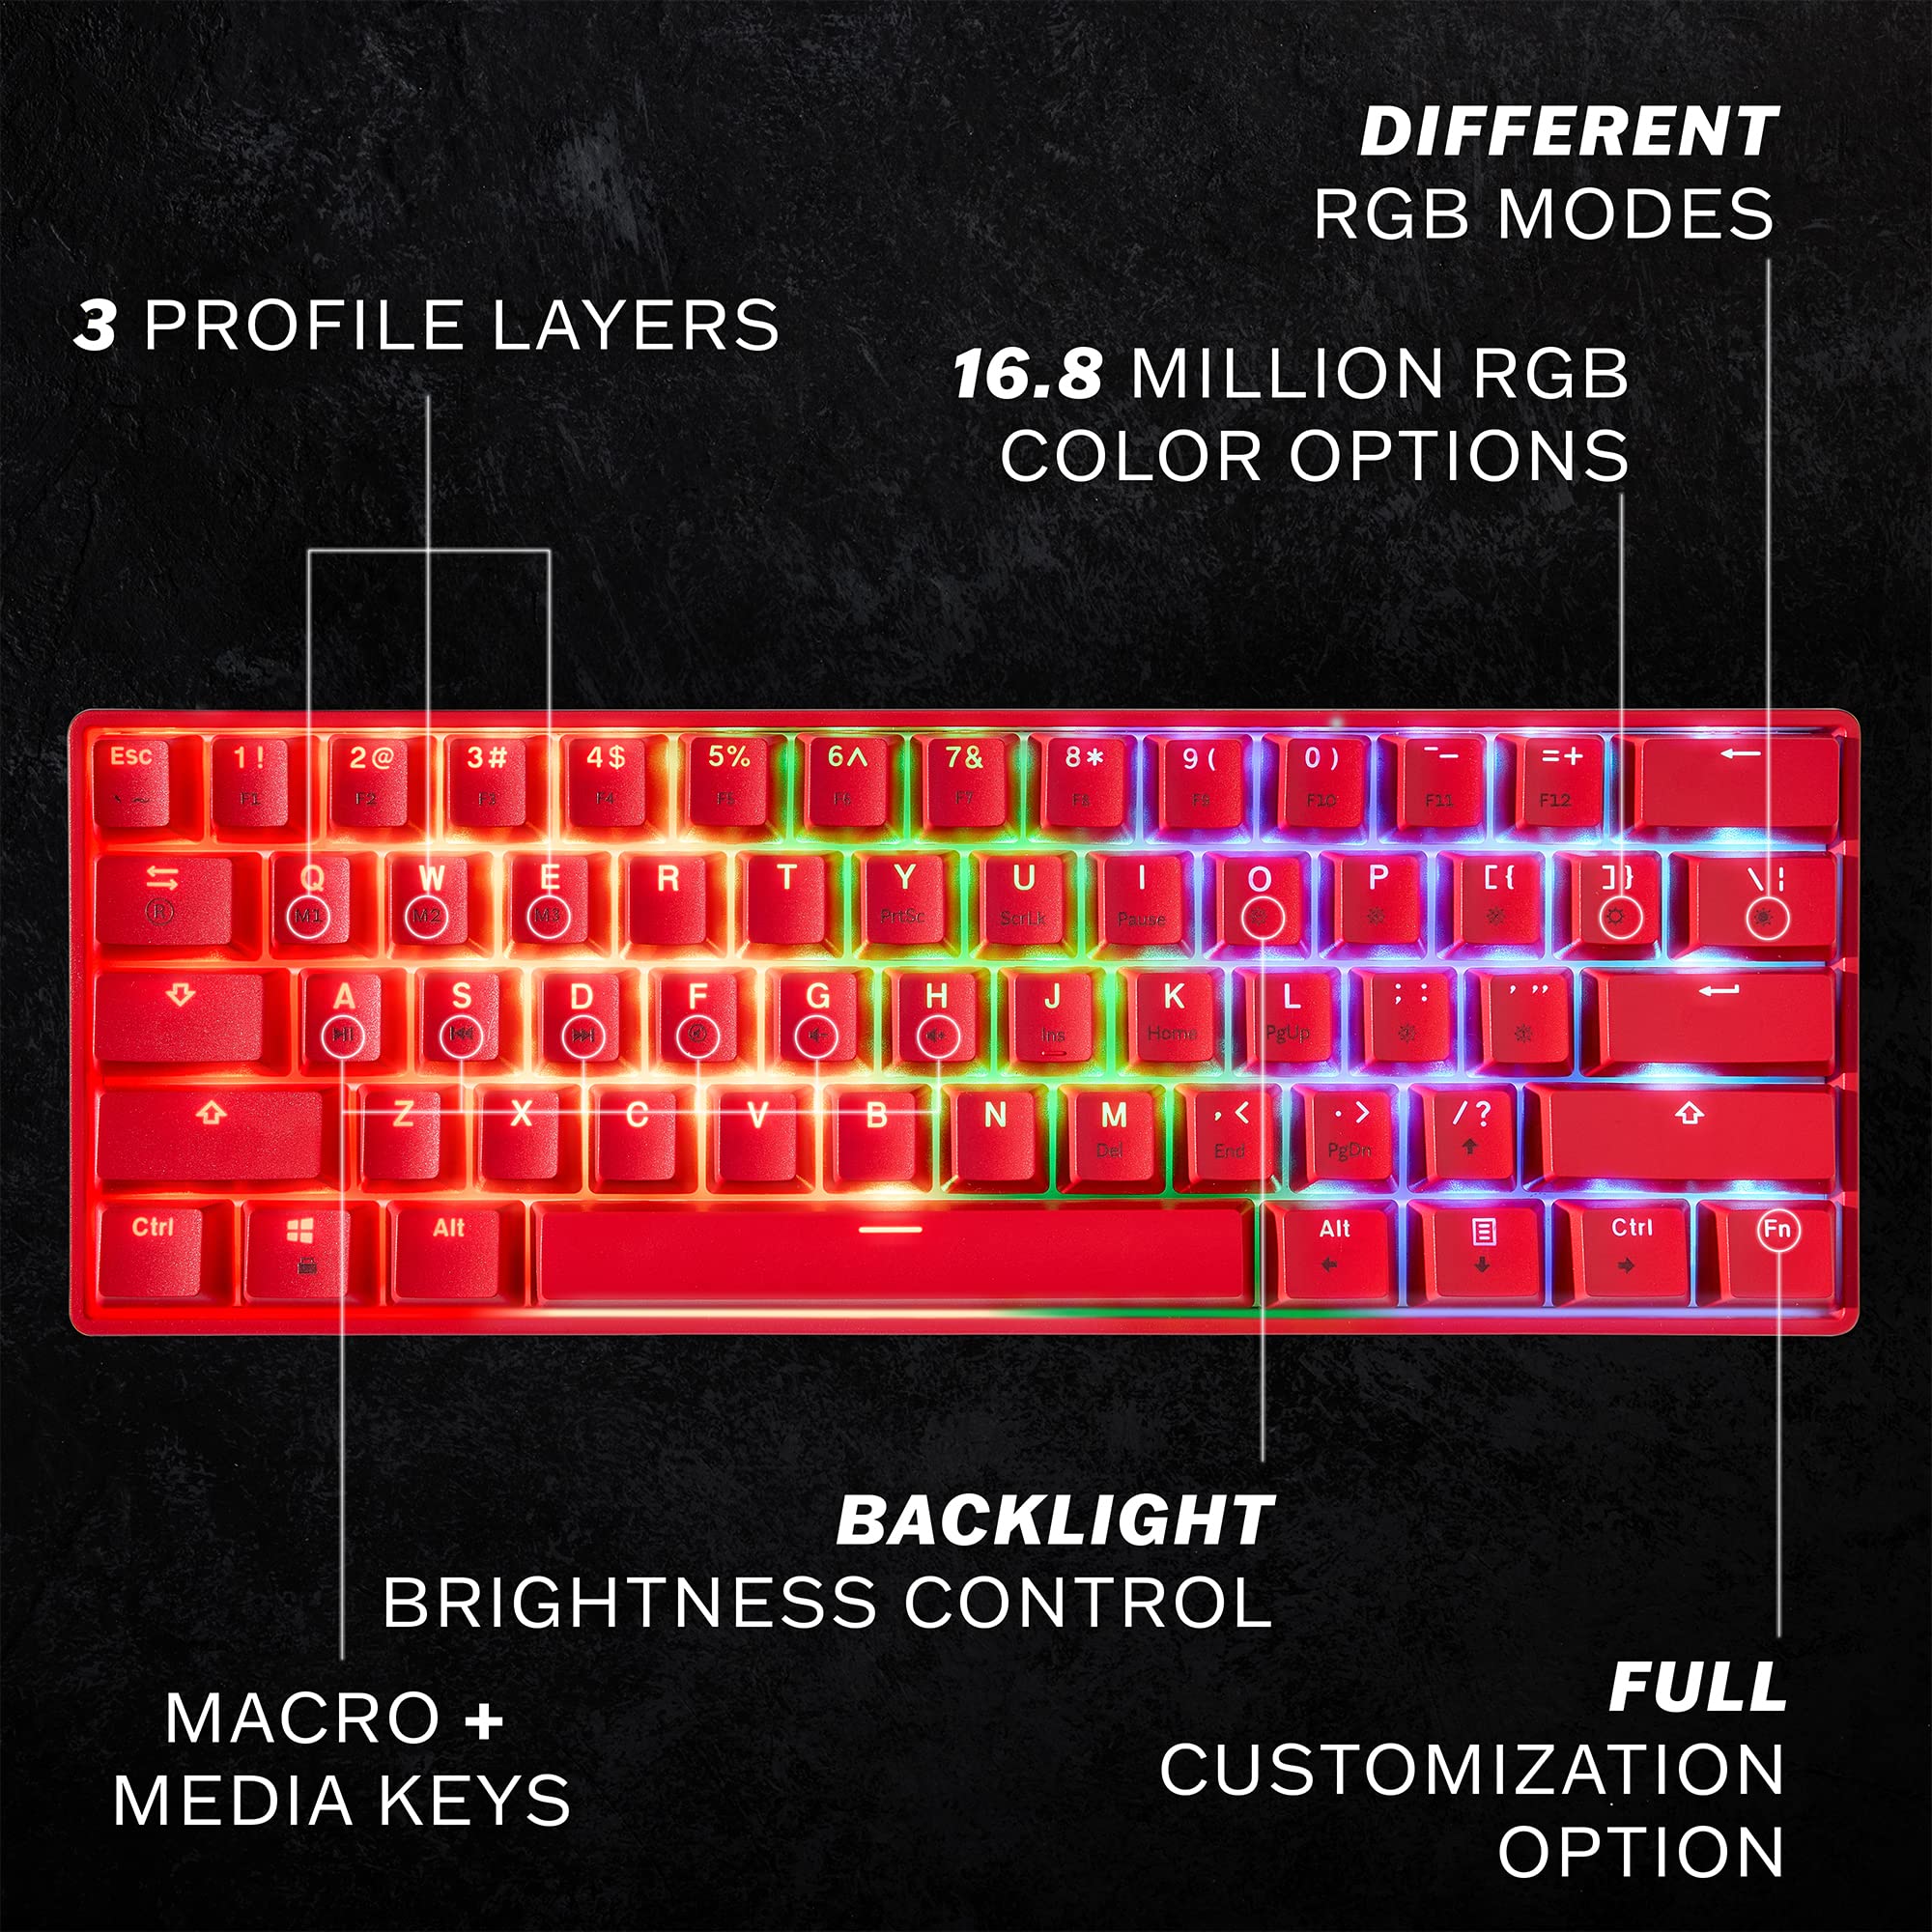 HK GAMING GK61s Mechanical Gaming Keyboard - 61 Keys Multi Color RGB Illuminated LED Backlit Wired Programmable for PC/Mac Gamer (Gateron Mechanical Blue, Red)